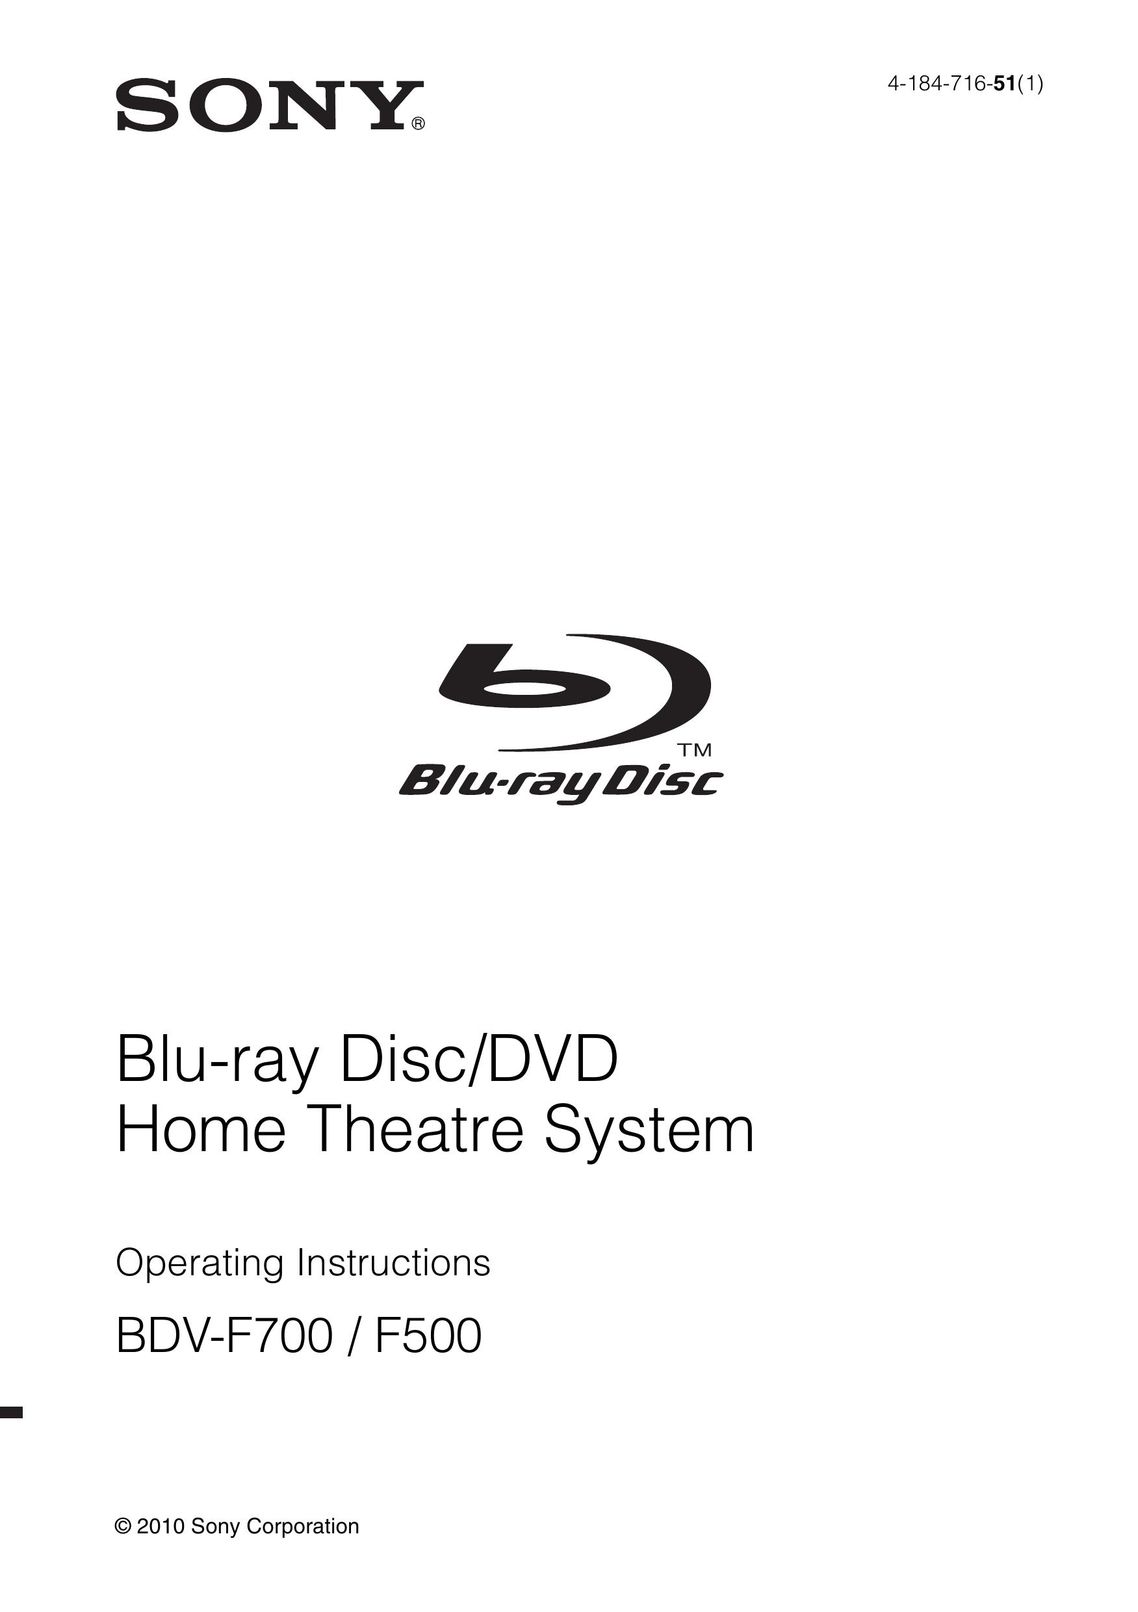 Sony BDV-F700 Home Theater System User Manual